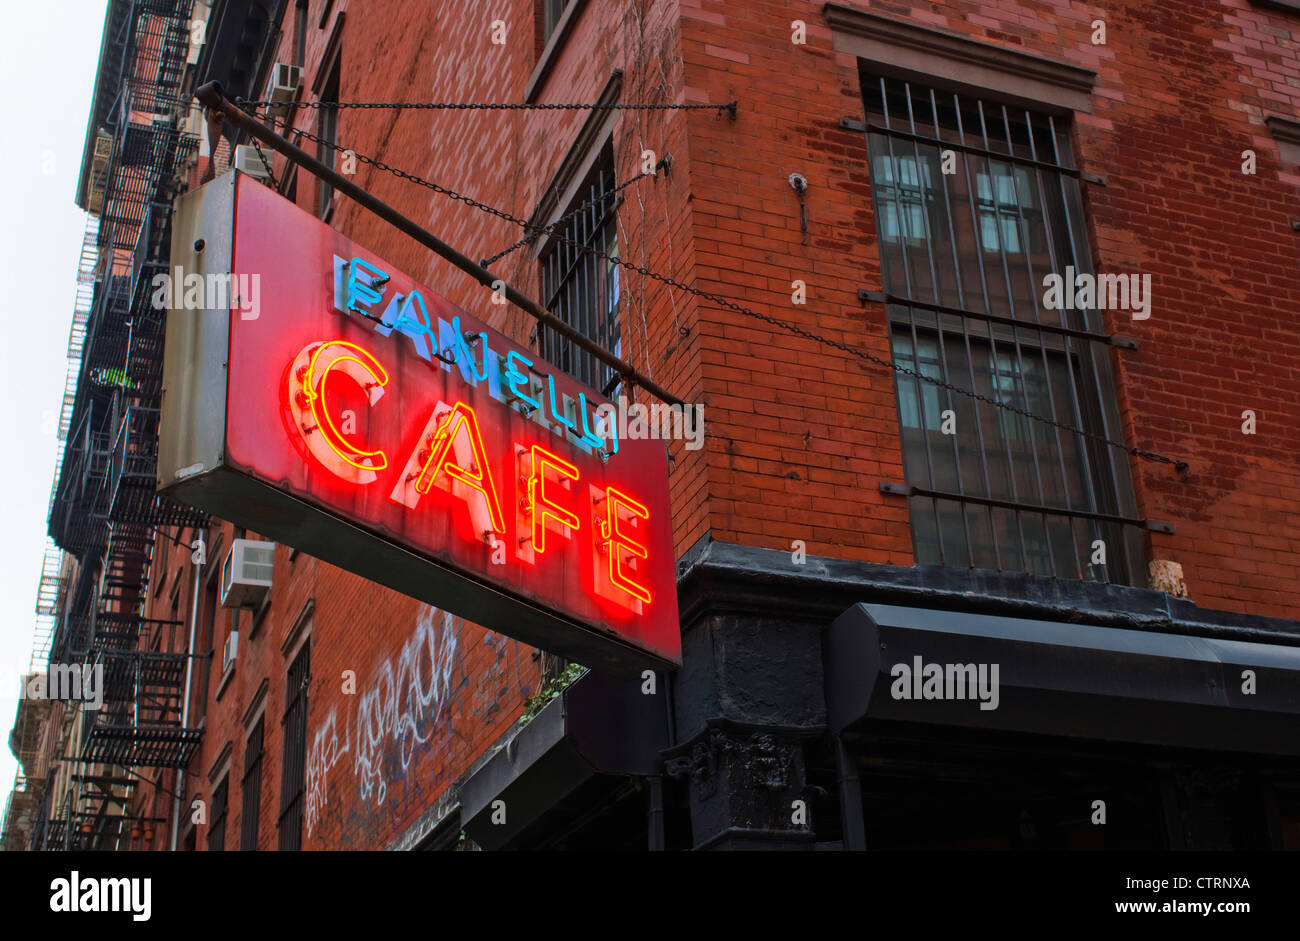 Neon sign outside Fanelli Cafe in Soho, New York City Stock Photo